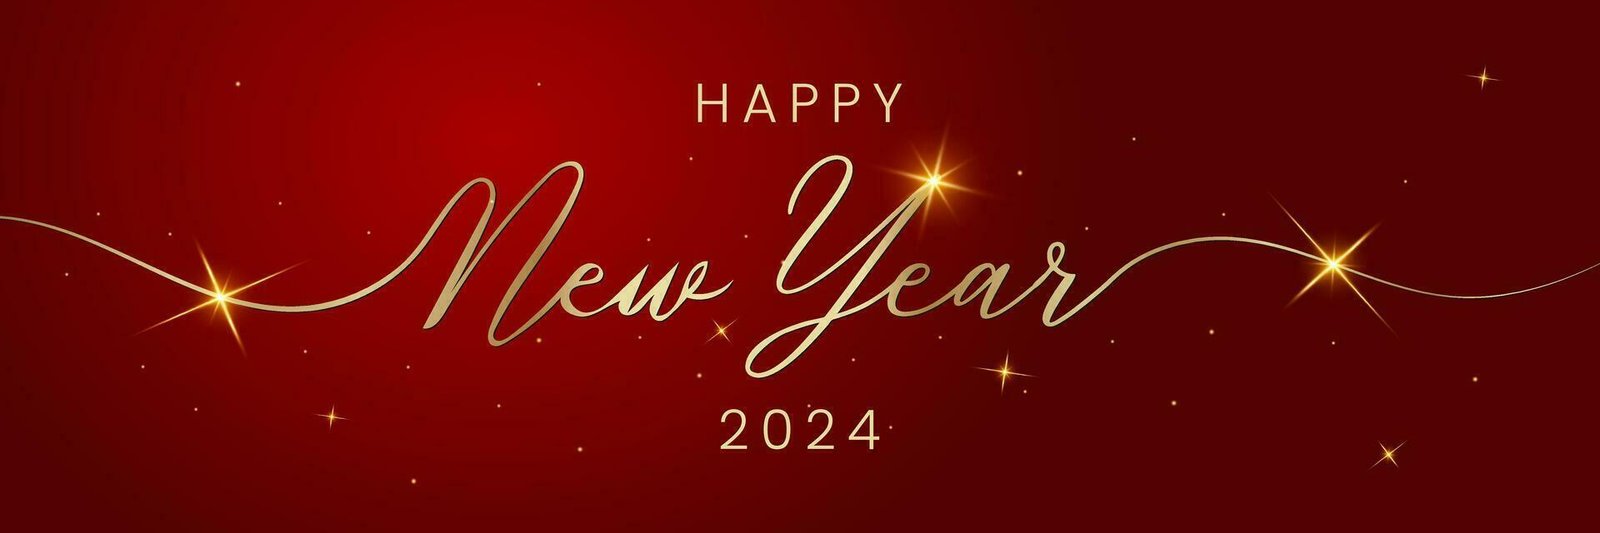 happy-new-year-2024-letters-luxury-banner-art-and-illustration-can-use-for-landing-page-template-ui-web-mobile-app-poster-banner-flyer-background-vector